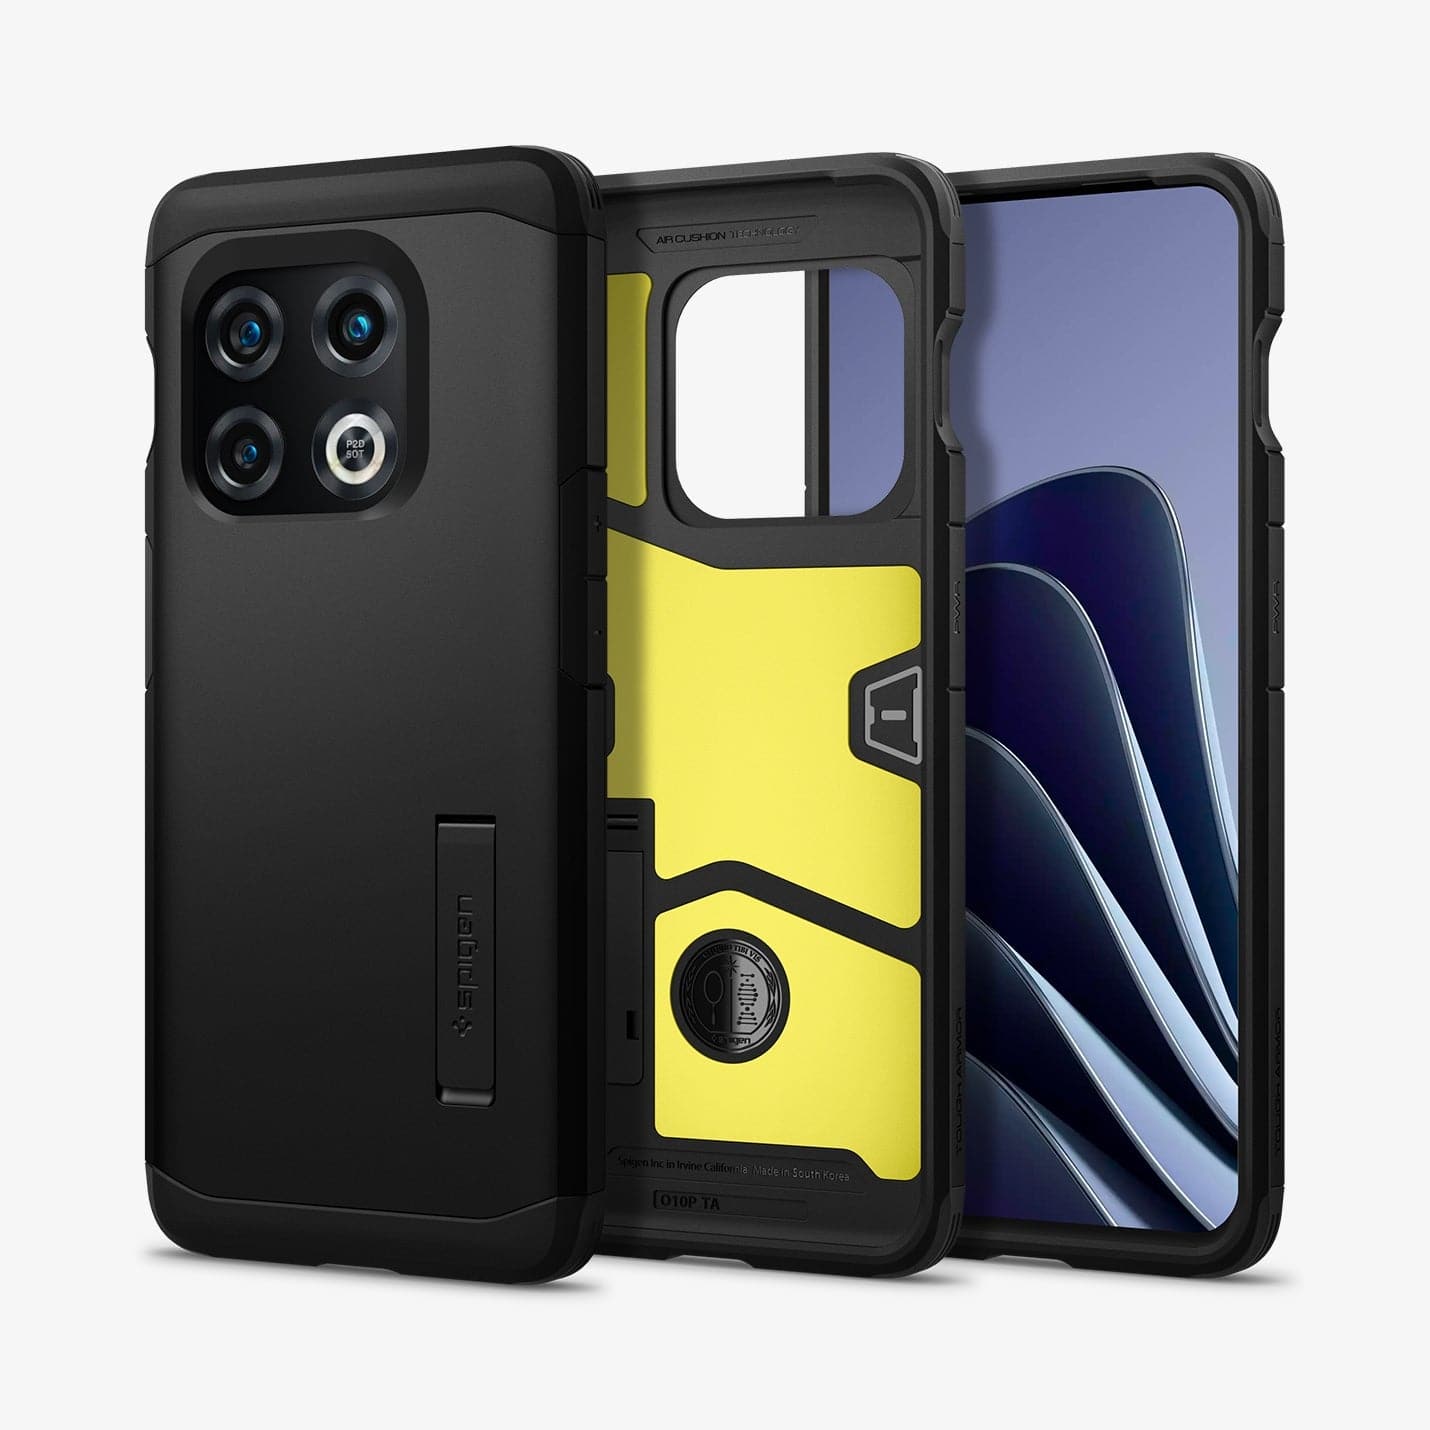 ACS04432 - OnePlus 10 Pro Tough Armor Case in Black showing the back, inner case with impact foam, front and partial sides paralleled with each other